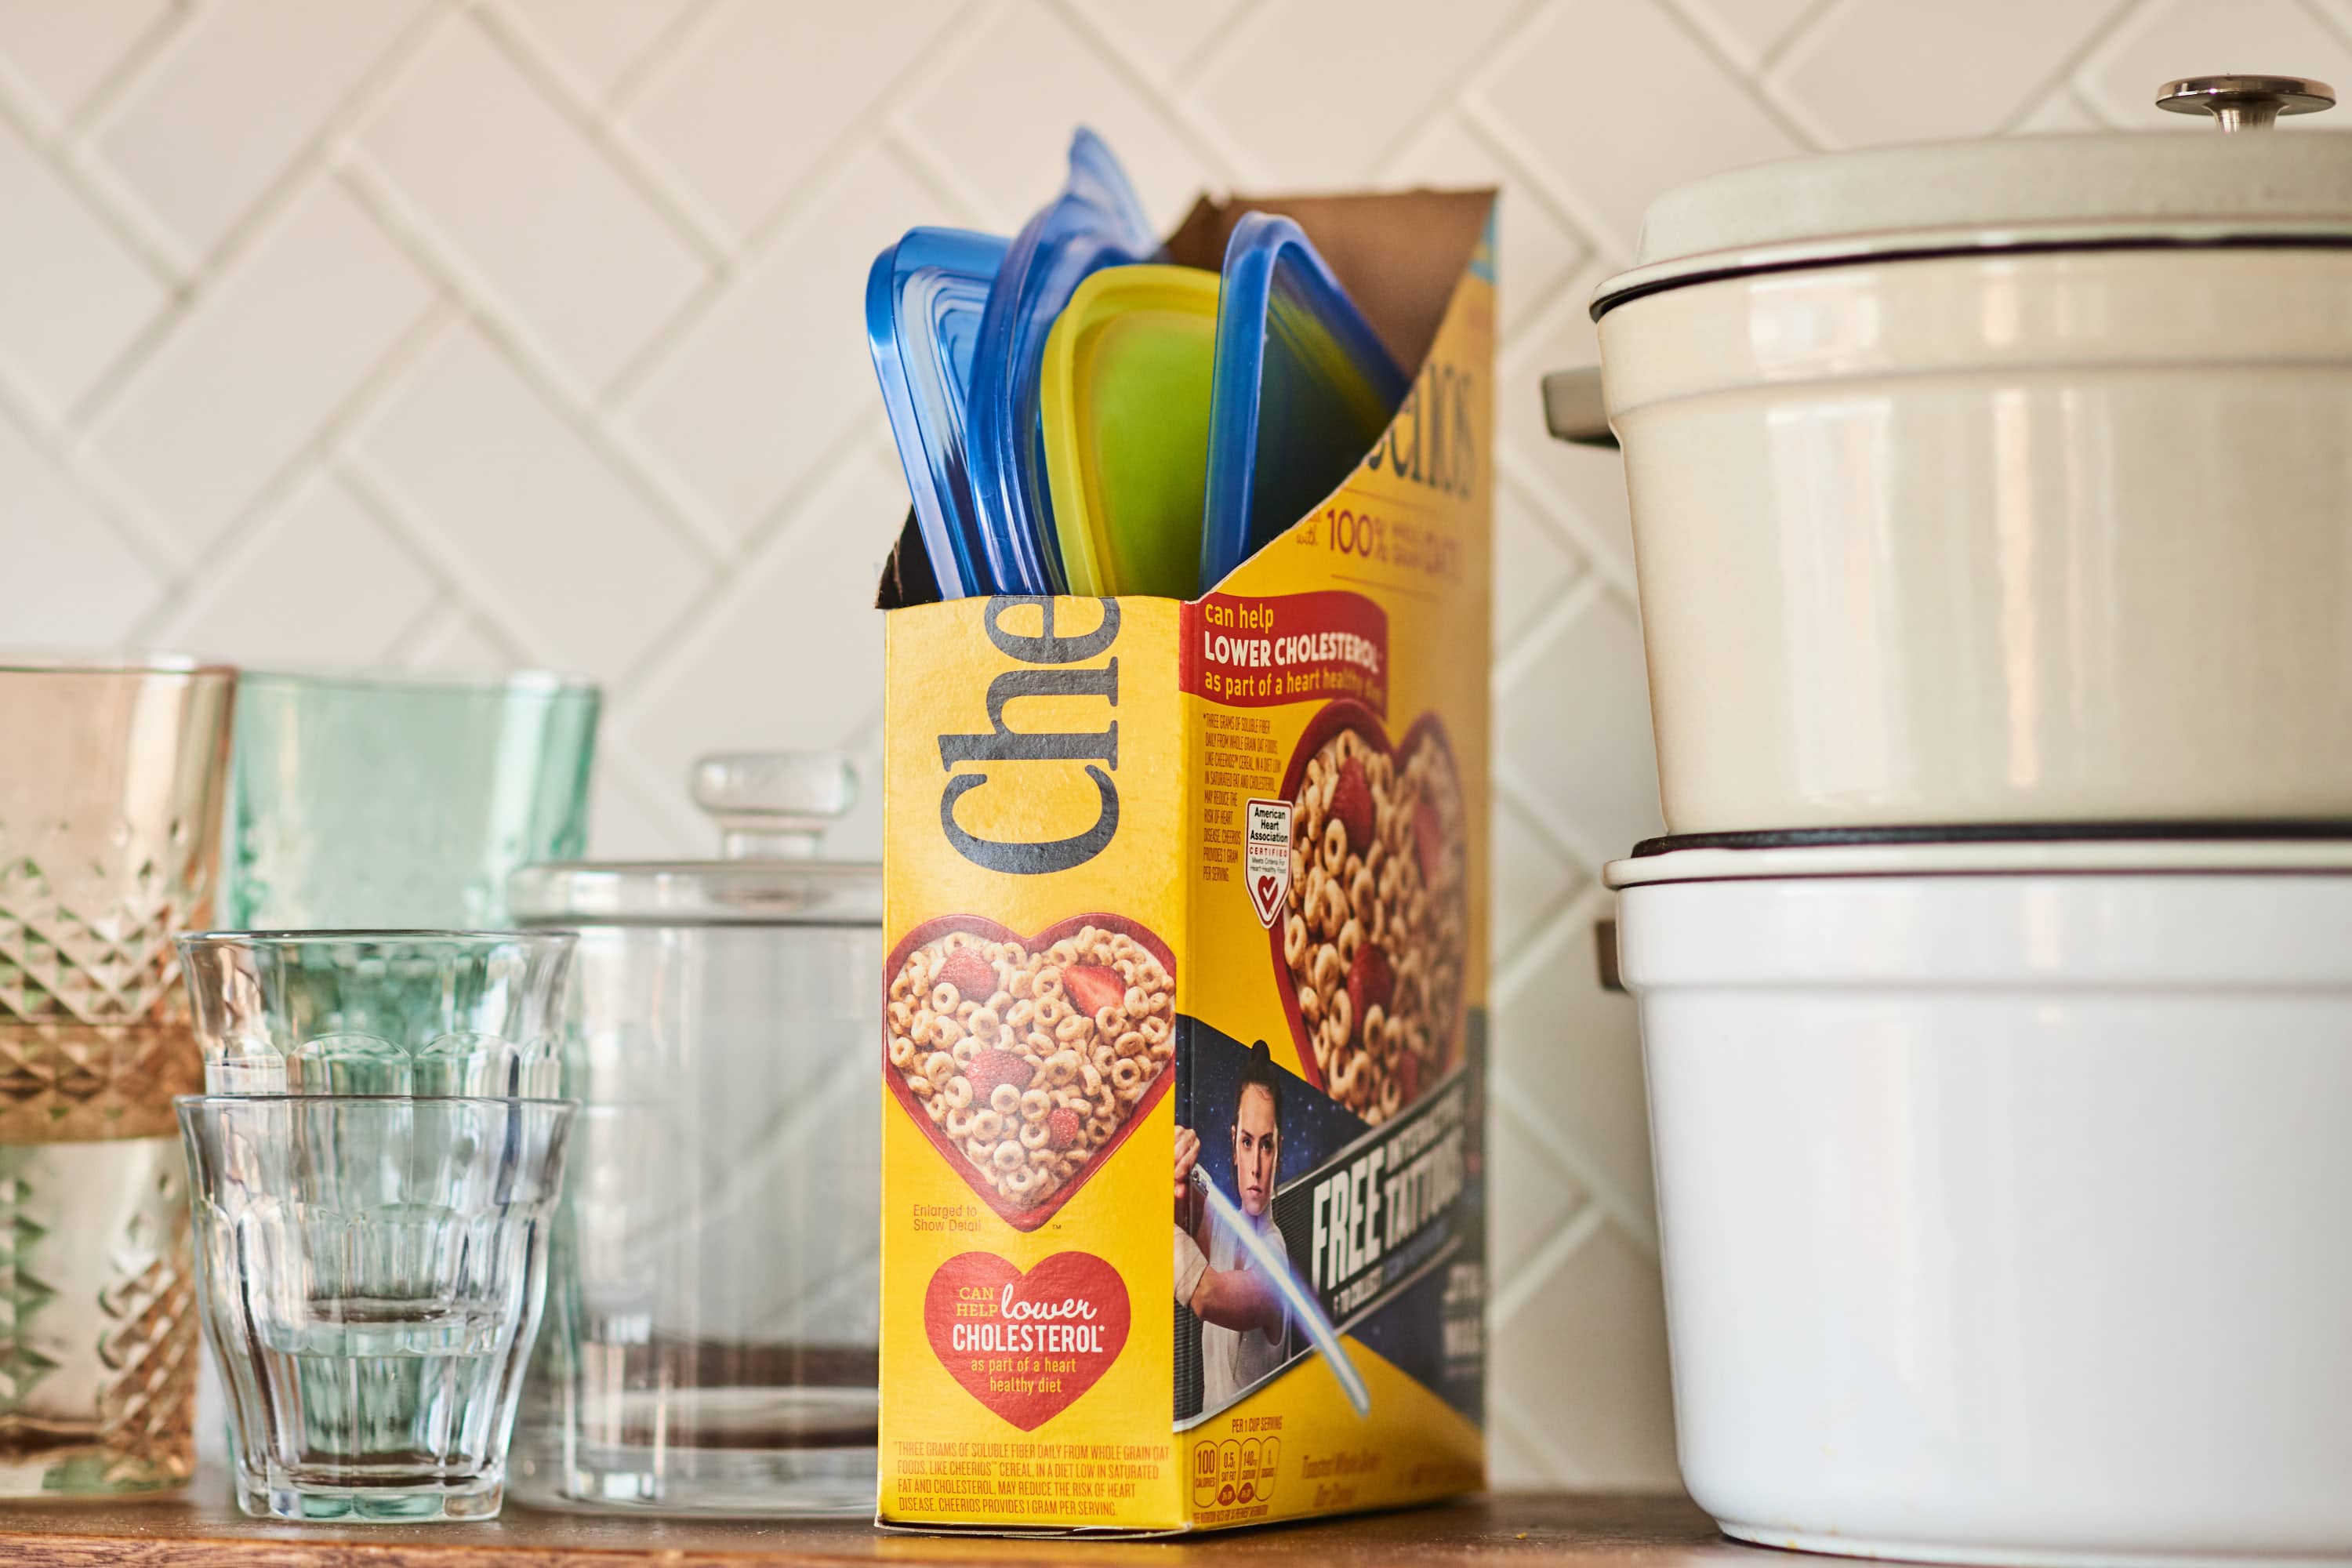 https://cdn.apartmenttherapy.info/image/upload/v1576274781/k/Photo/Lifestyle/2020-01-Empty-Cereal-Box-Hack/An-Empty-Cereal-Box-Will-Solve-One-of-The-Most-Annoying-Kitchen-Messes_080.jpg